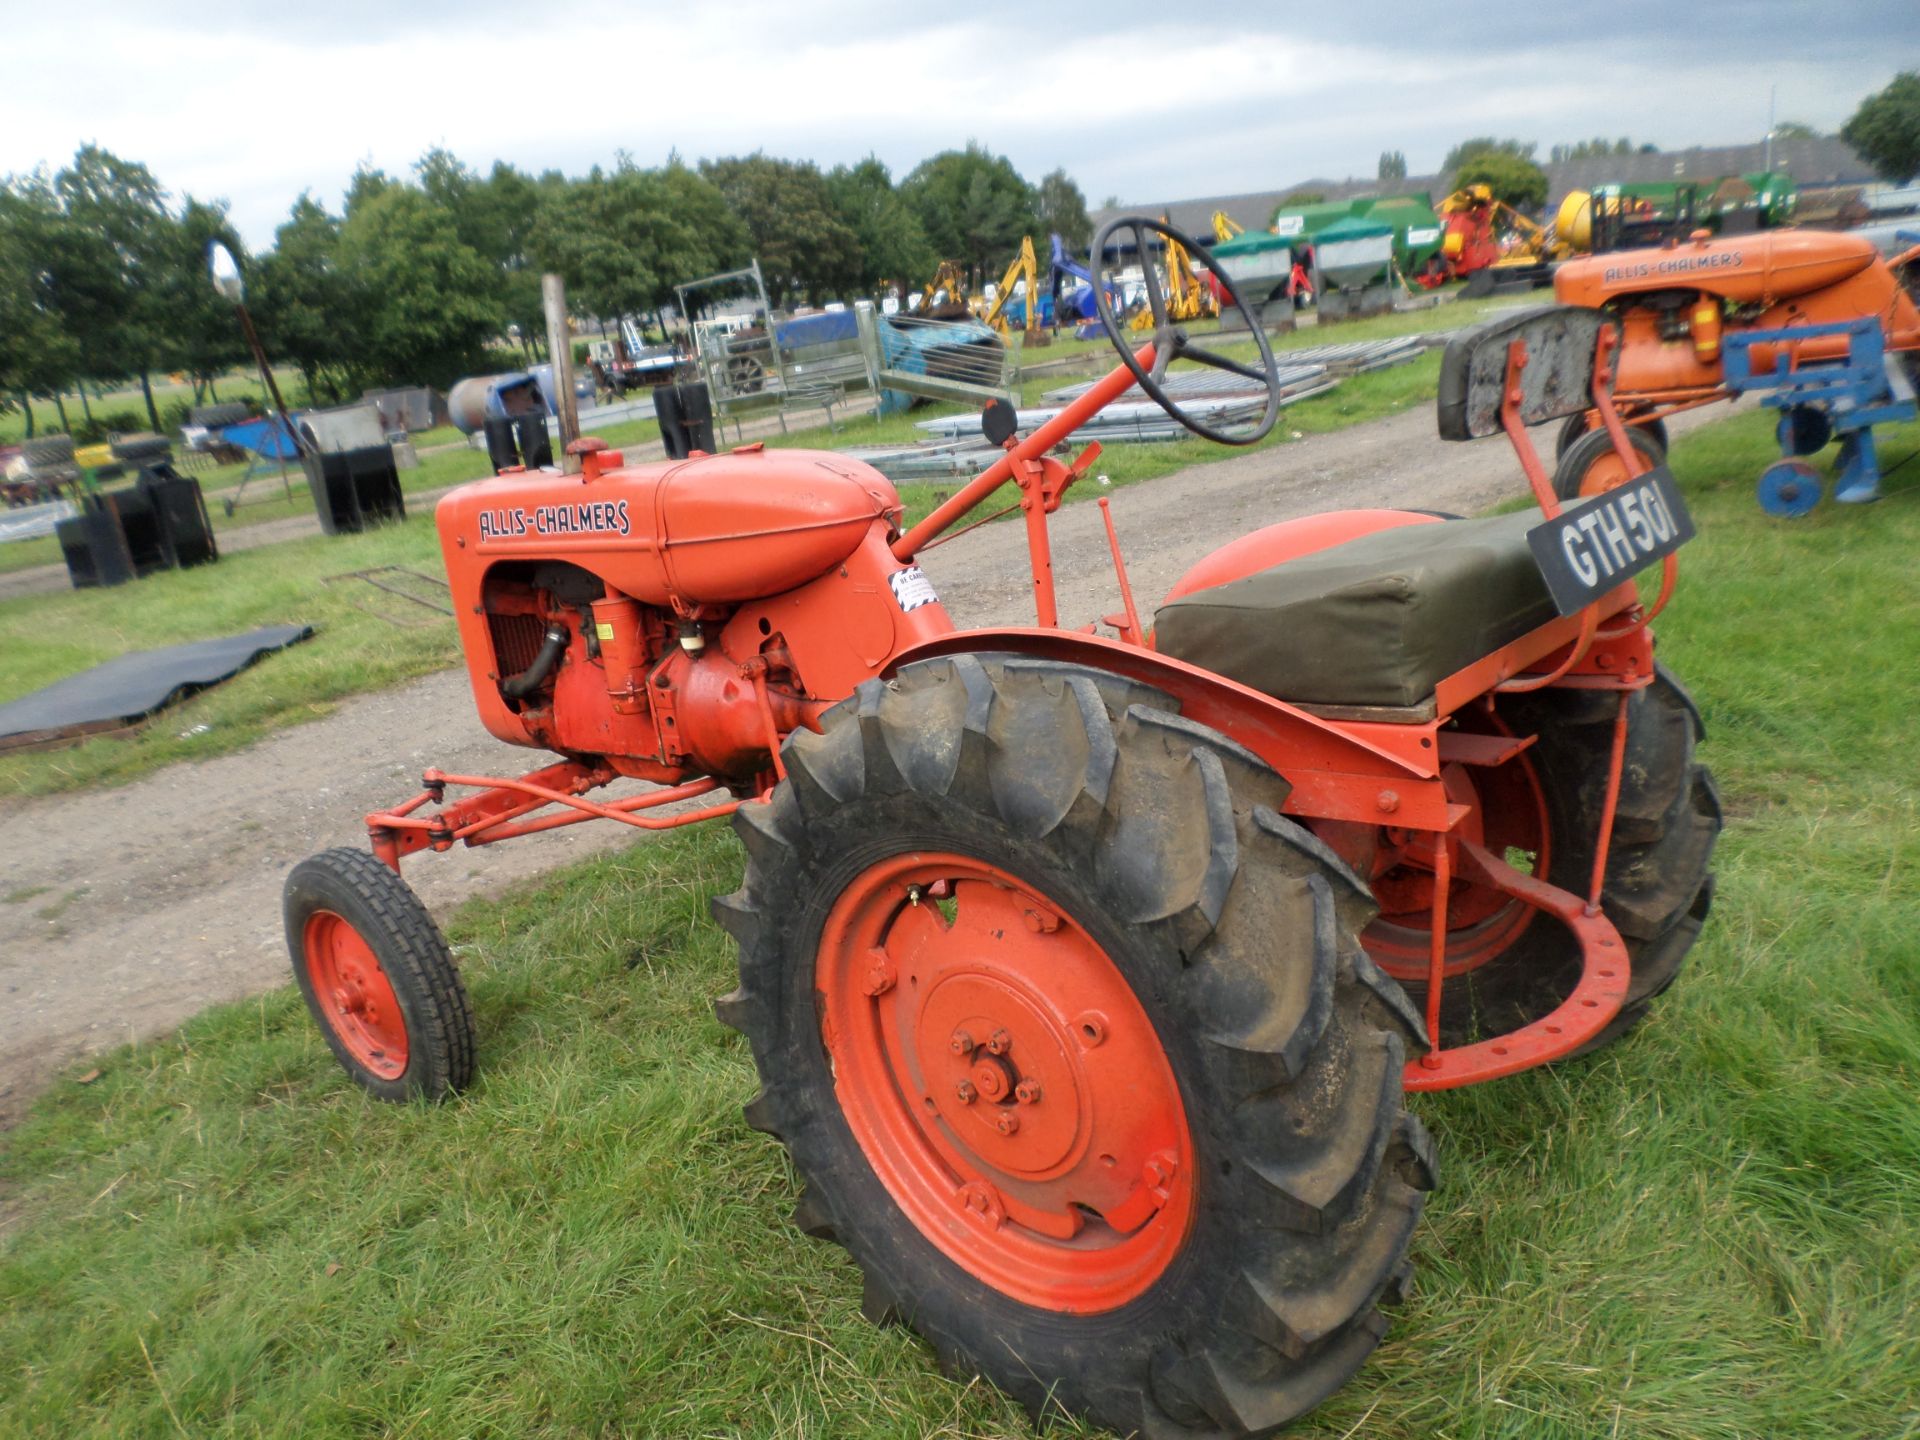 Allis Chalmers Model B tractor, registered November 1951, GTH 501 with old style buff logbook and - Image 3 of 3